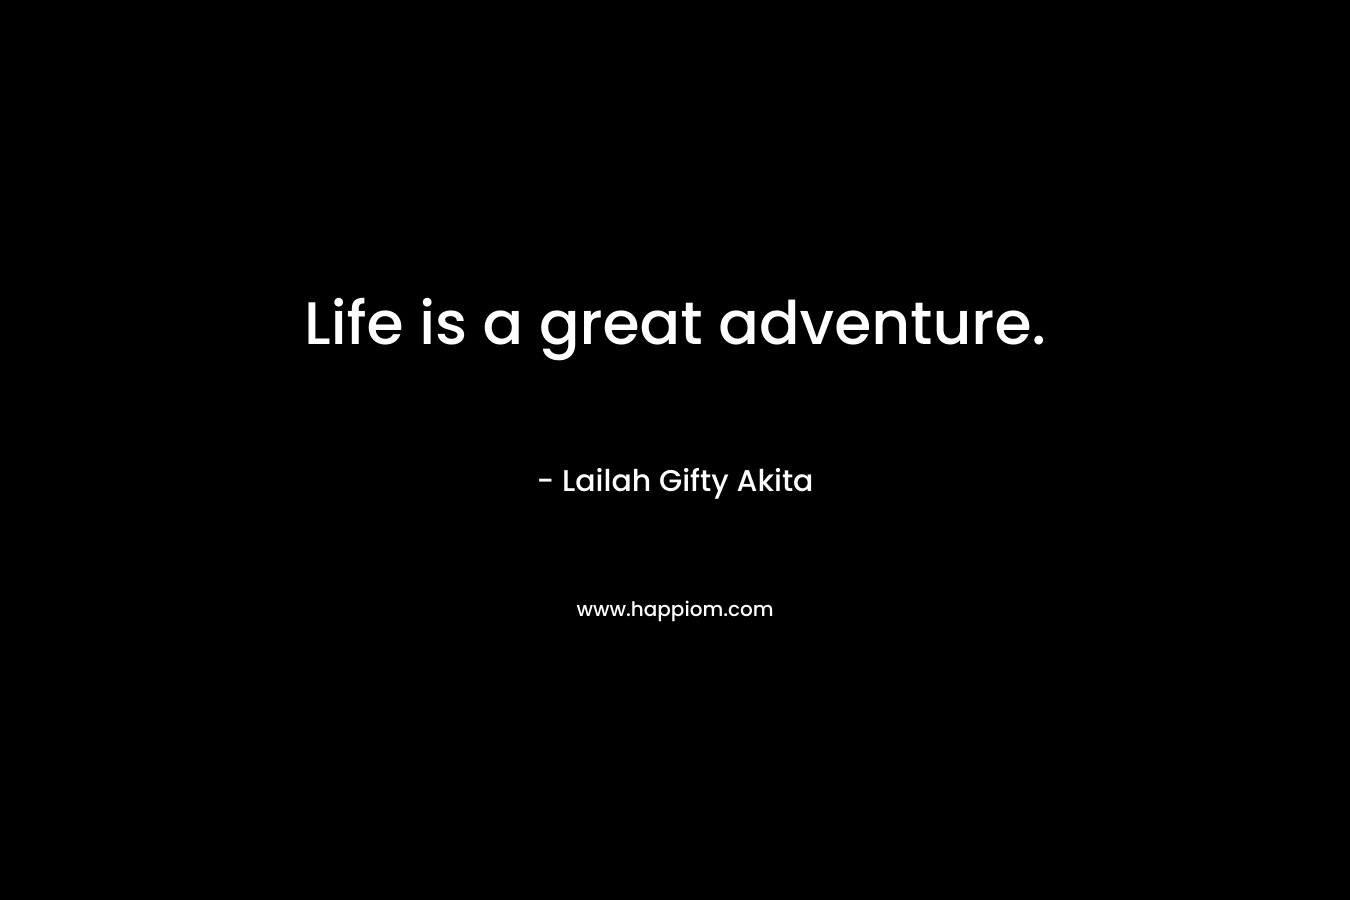 Life is a great adventure.